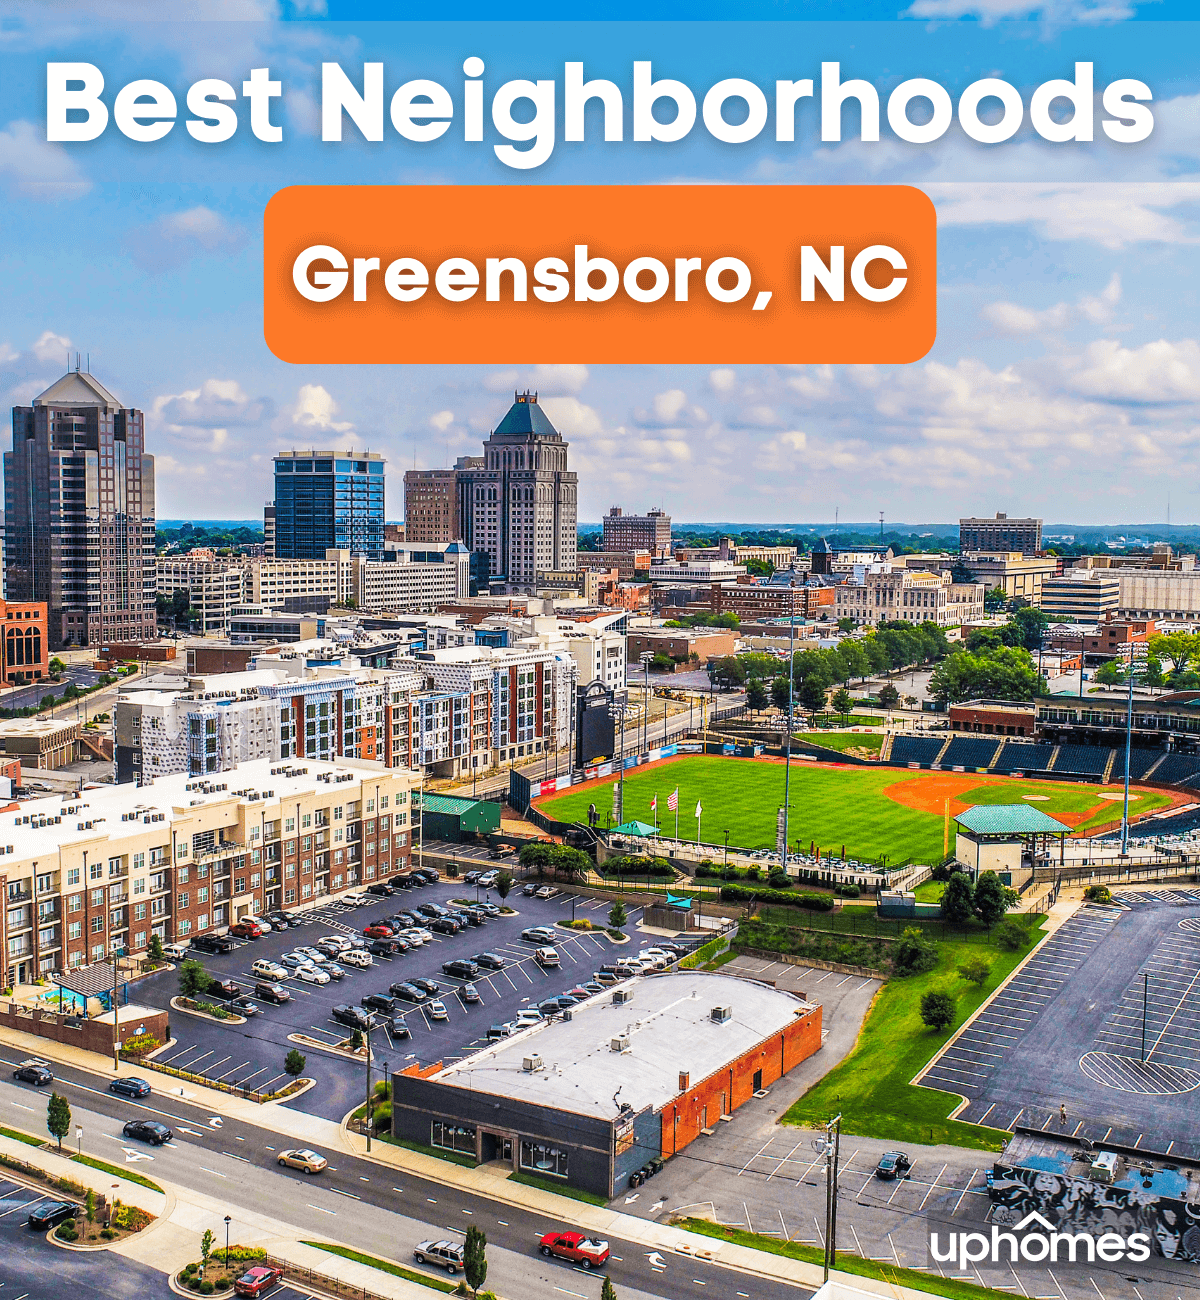 Best Neighborhoods in Greensboro, NC - What are the Best Places to Live in Greensboro for Families and Young Professionals